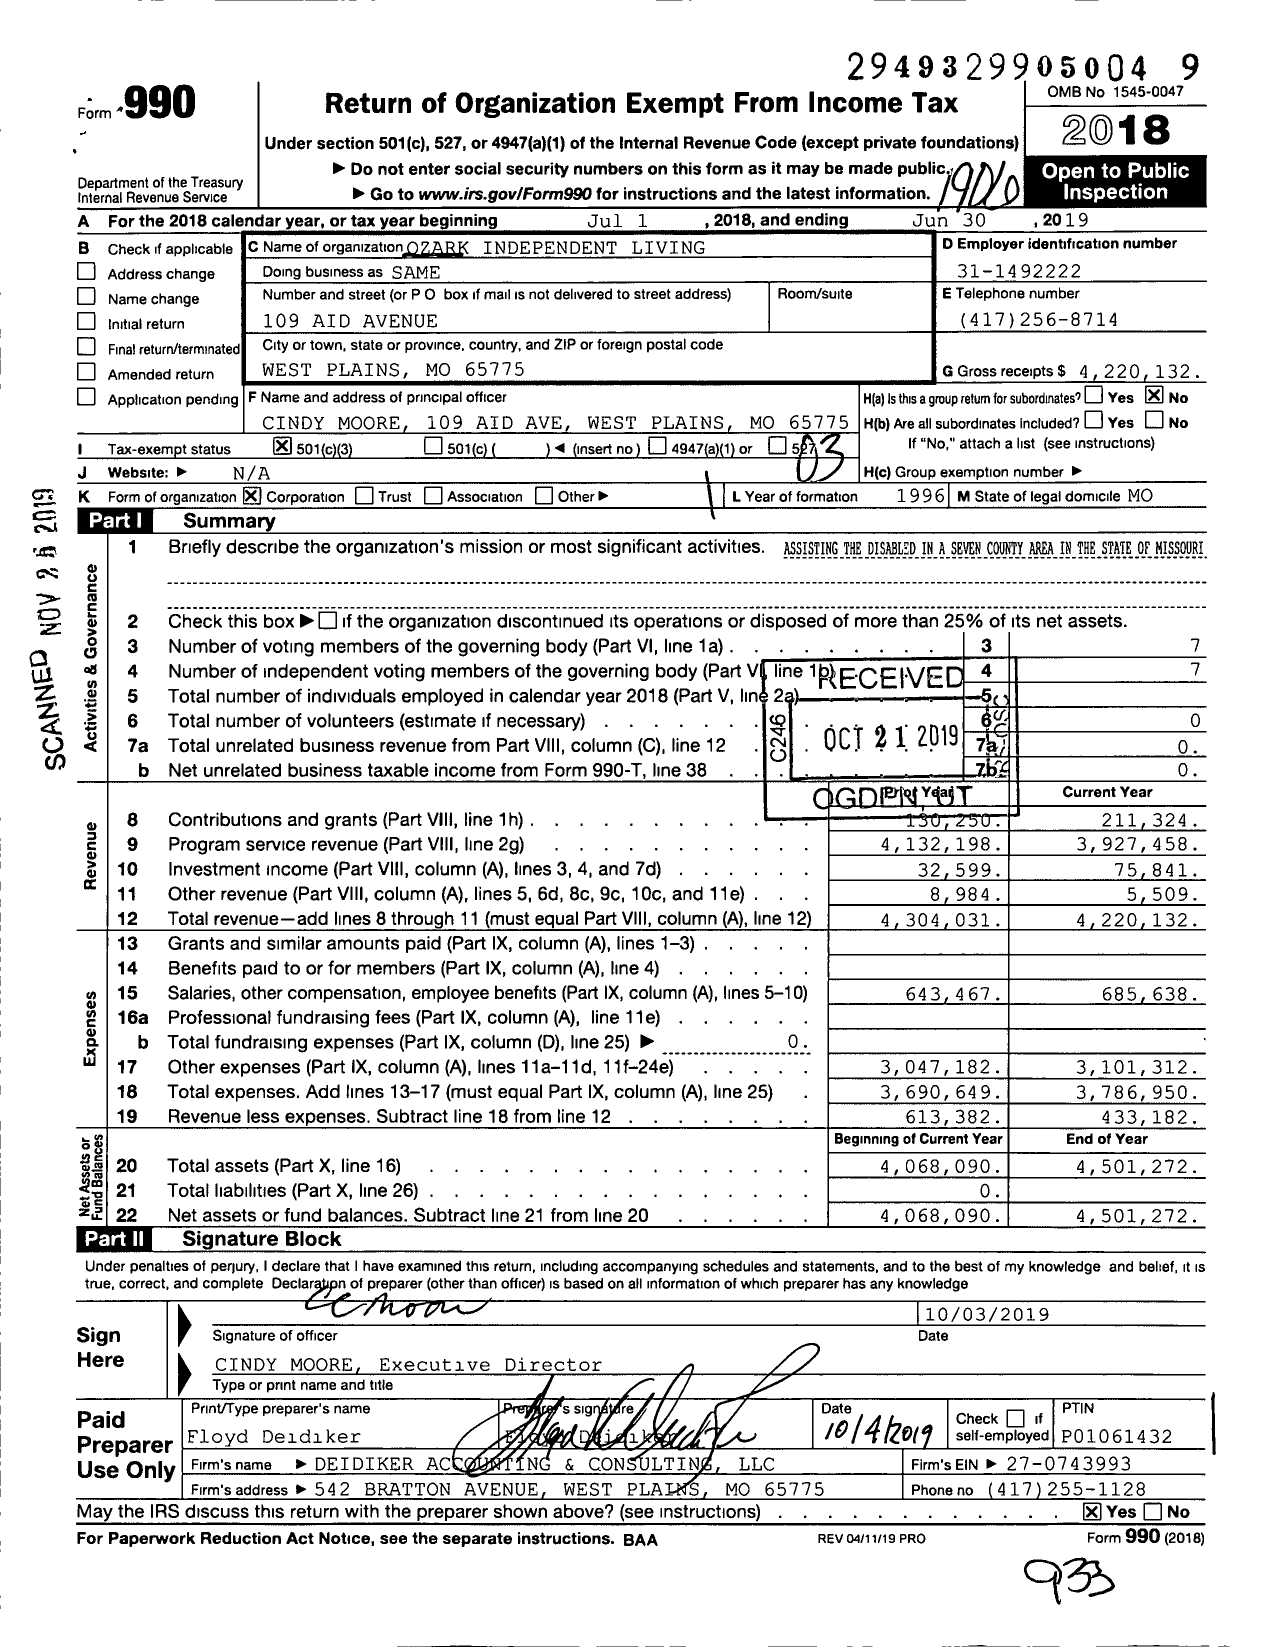 Image of first page of 2018 Form 990 for Ozark Independent Living (OIL)